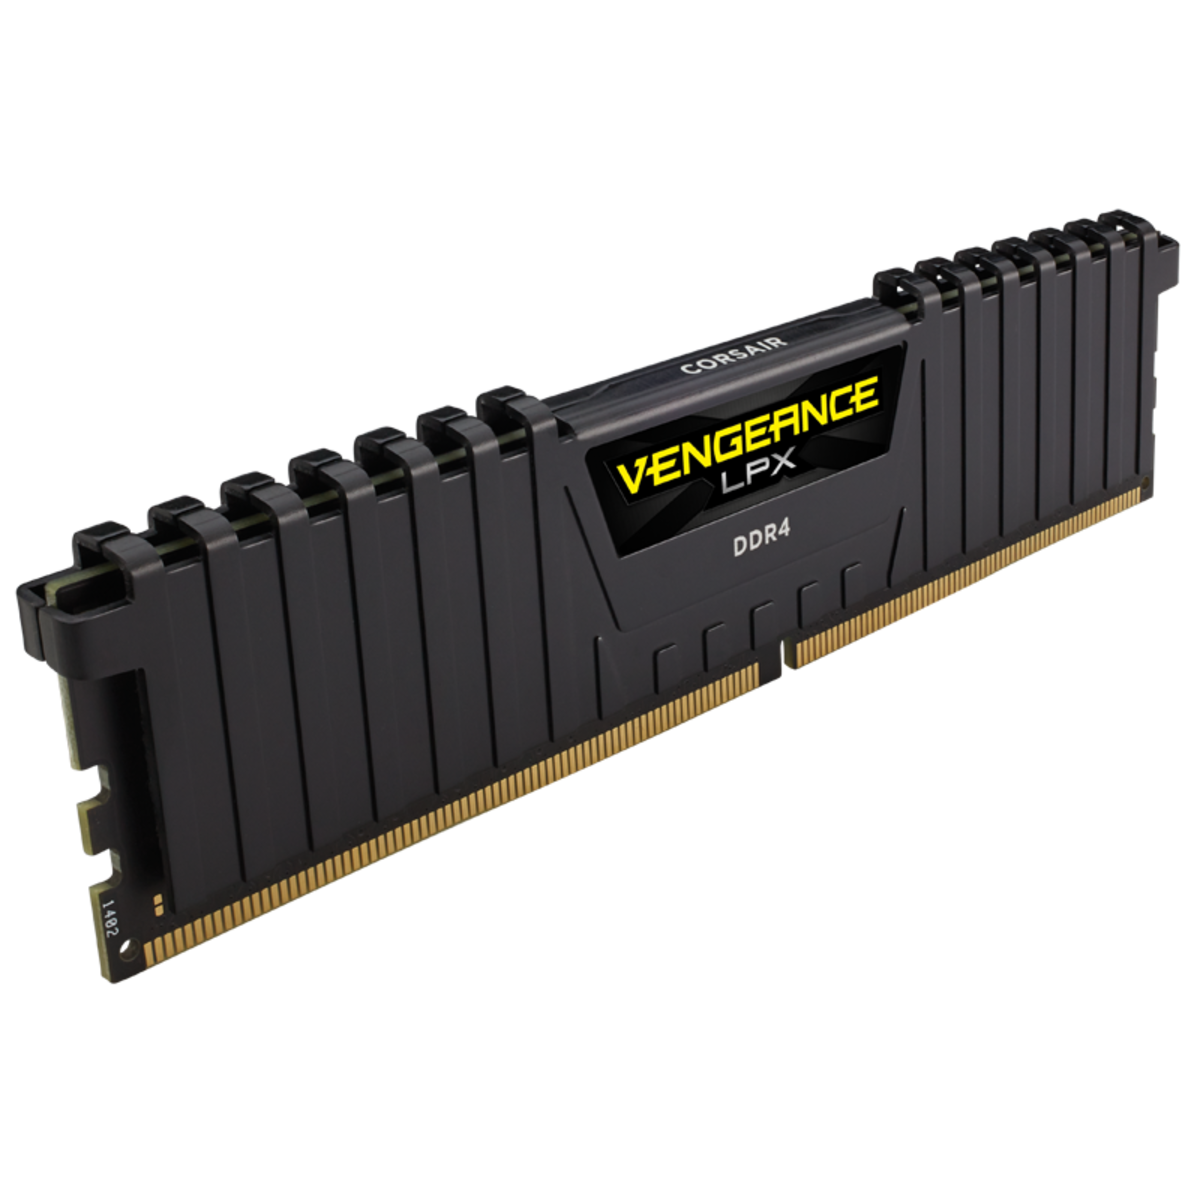 Media asset in full size related to 3dfxzone.it news item entitled as follows: Overclocking: Corsair lancia un kit di DDR4 VENGEANCE LPX che lavora a 5000MHz | Image Name: news30069_Corsair-VENGEANCE-LPX-2x8GB-5000MHz_2.png